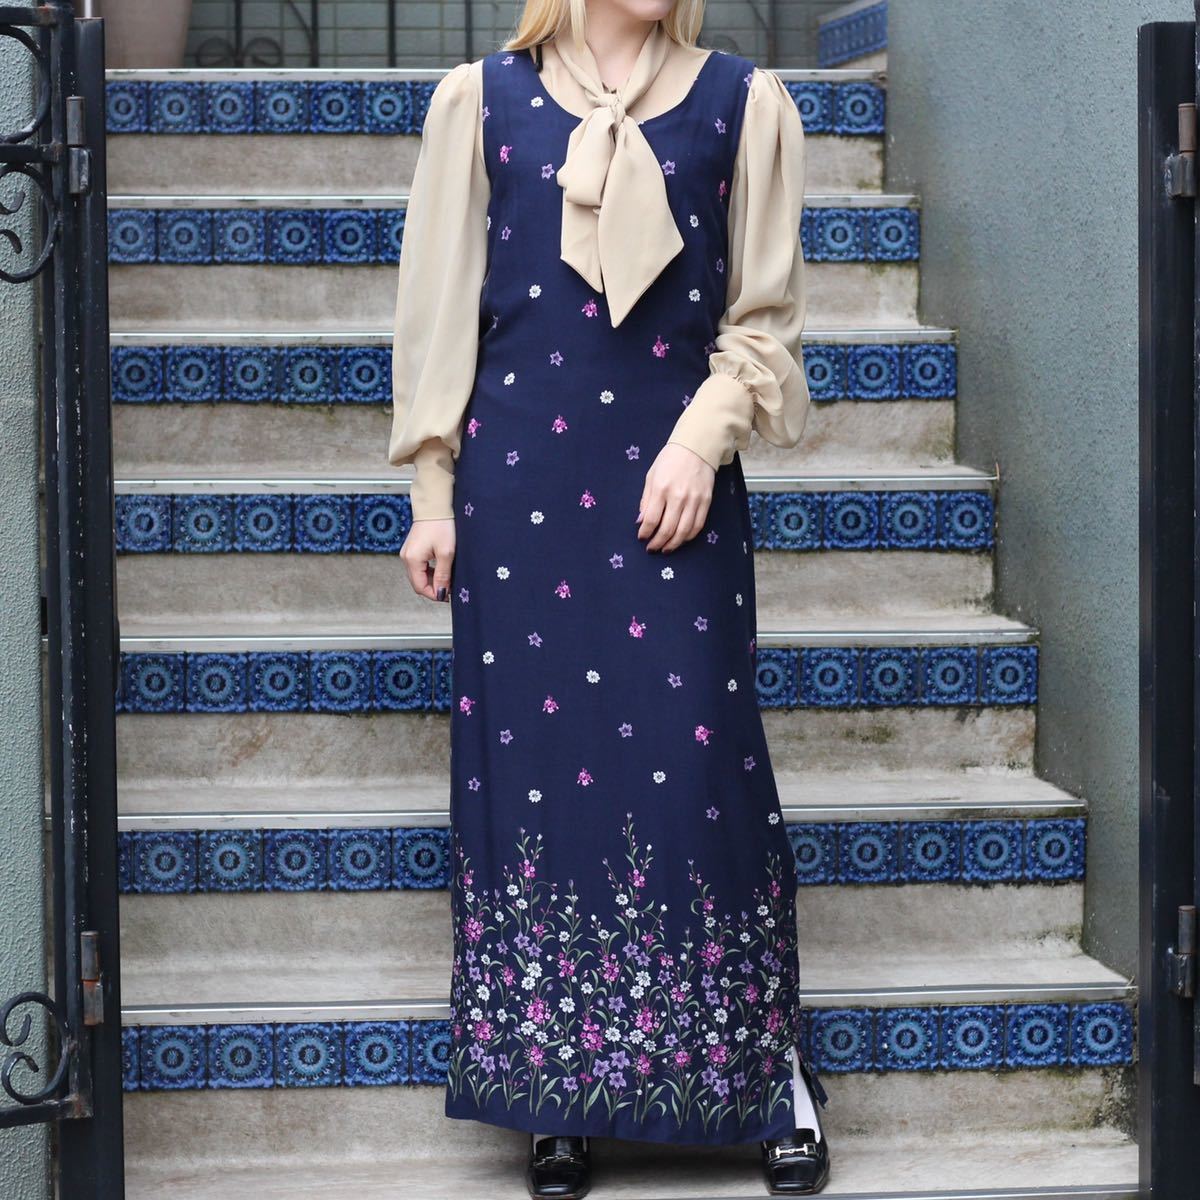 USA VINTAGE FLOWER PATTERNED RAYON NO SLEEVE ONE PIECE/アメリカ古着お花柄レーヨンノースリーブワンピース